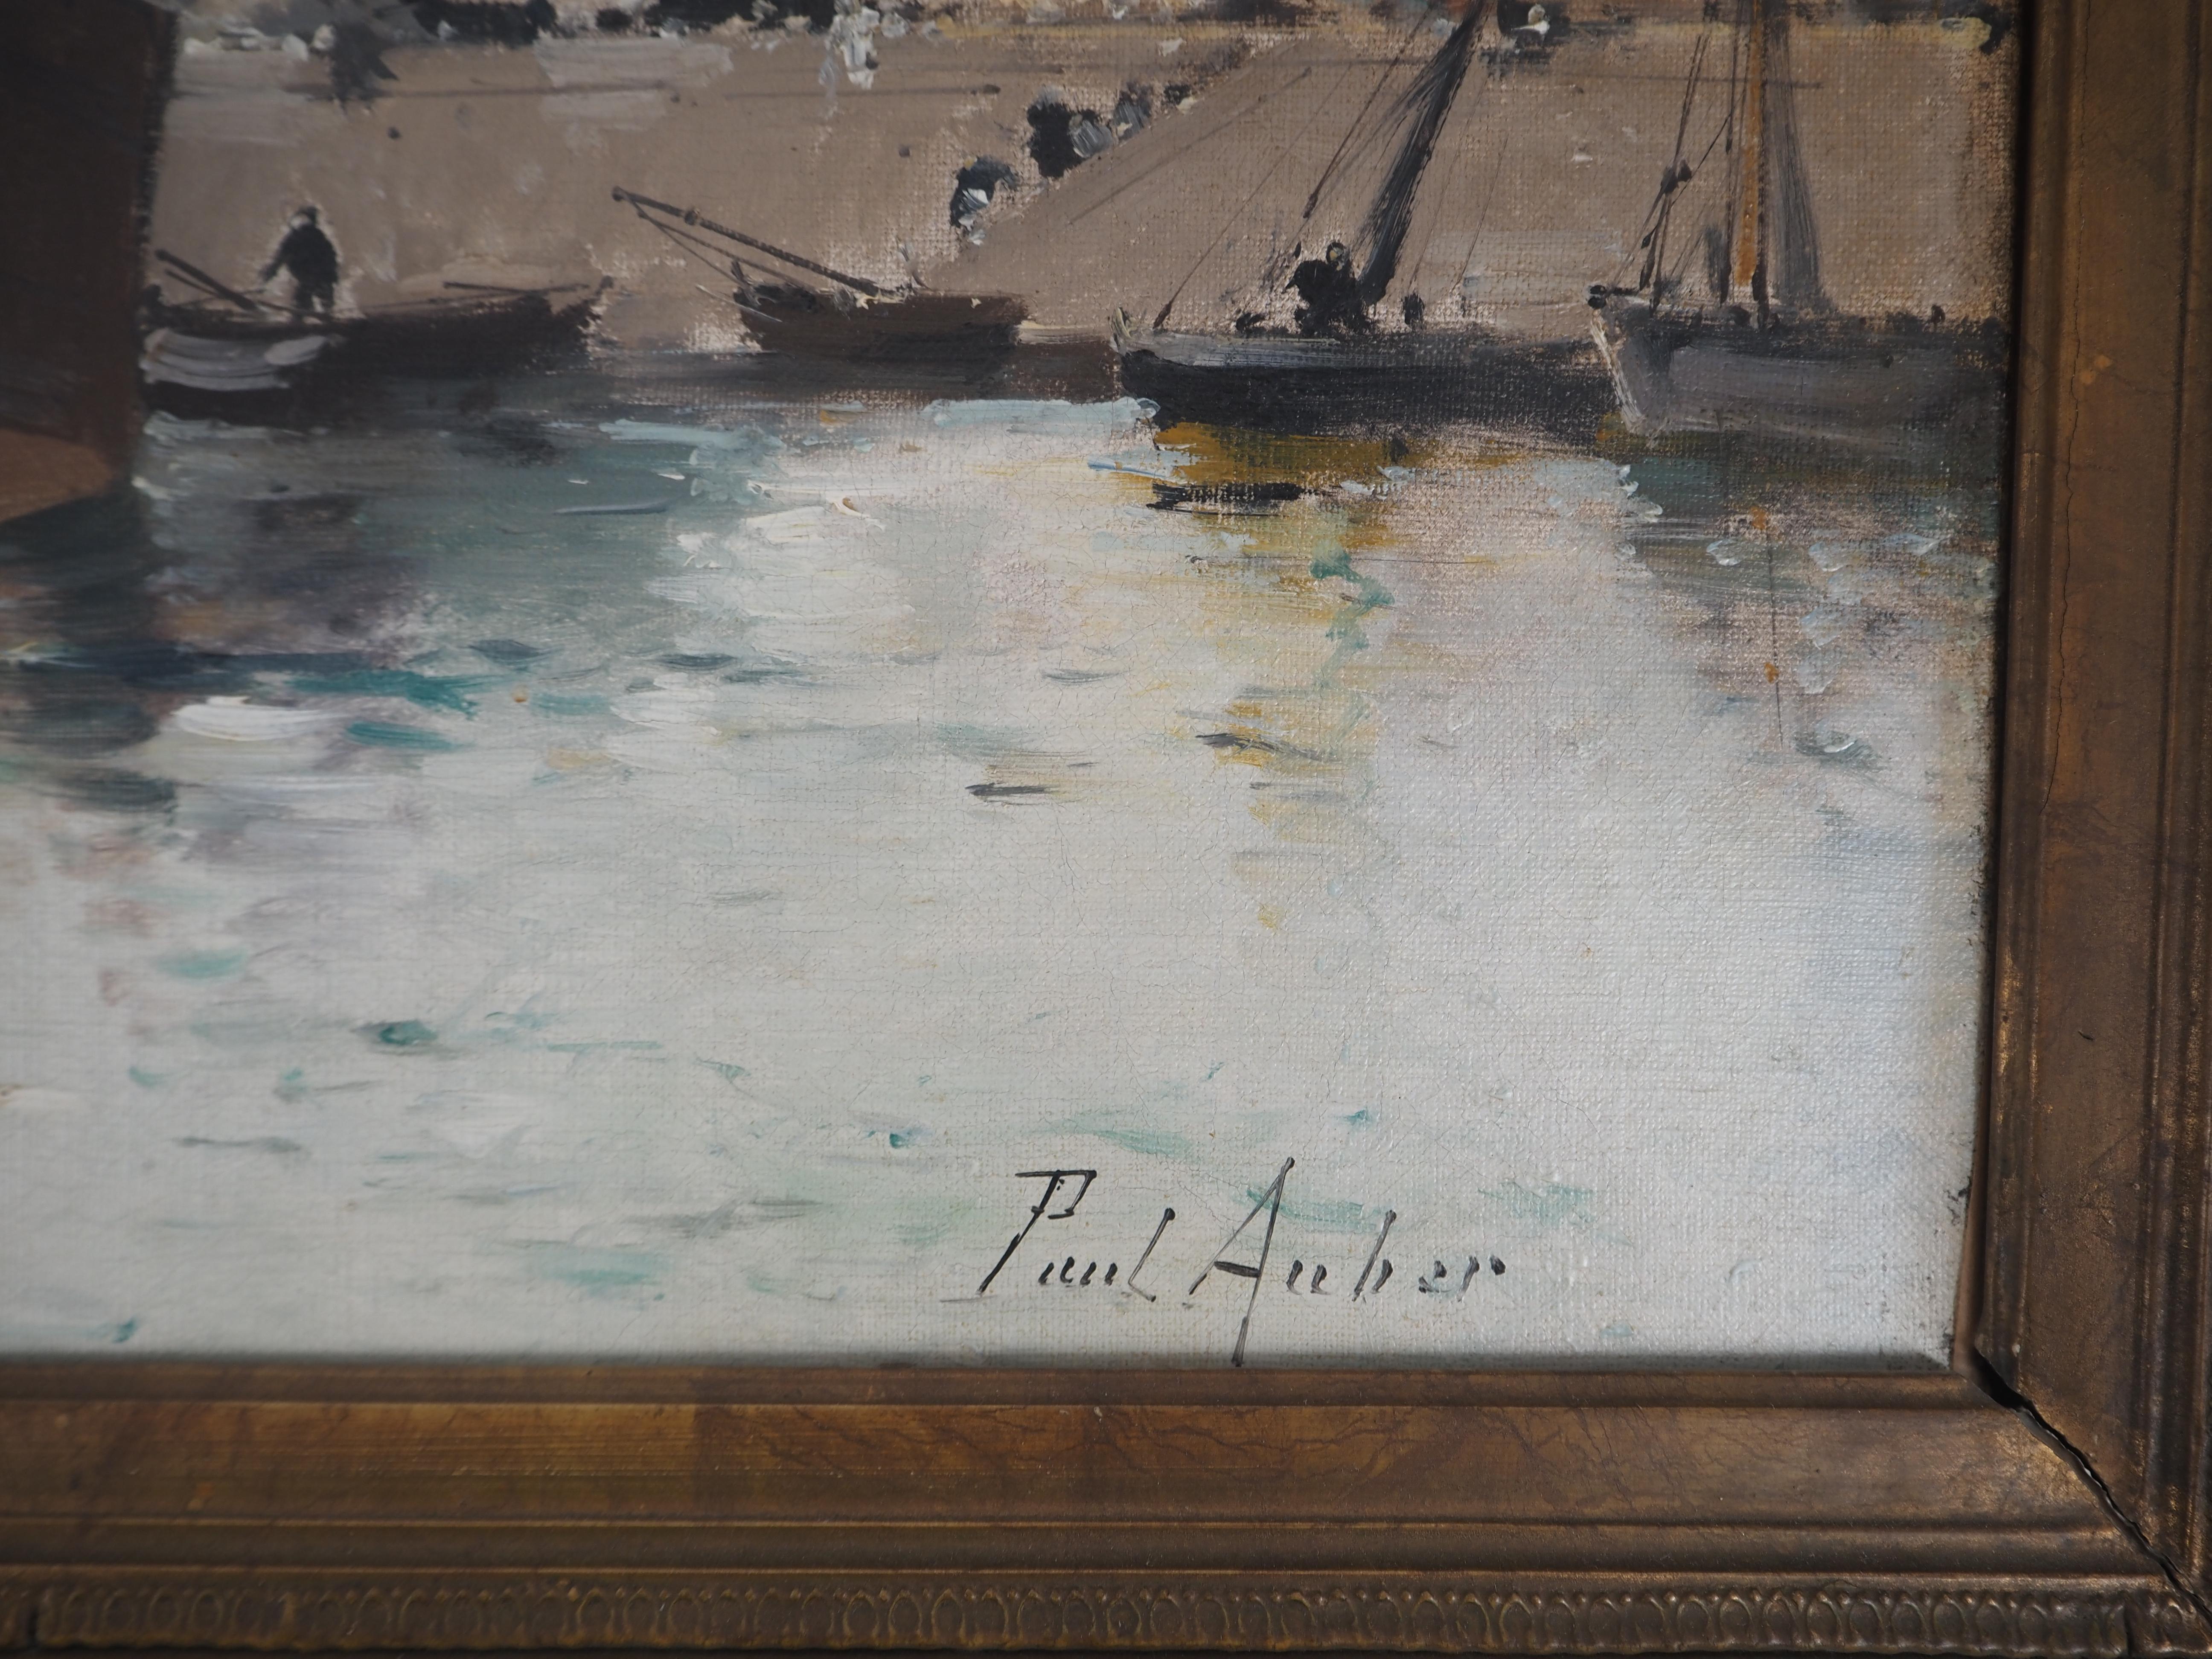 Boats Leaving the Harbor - Original painting on canvas - Signed - Post-Impressionist Painting by Eugene Galien-Laloue